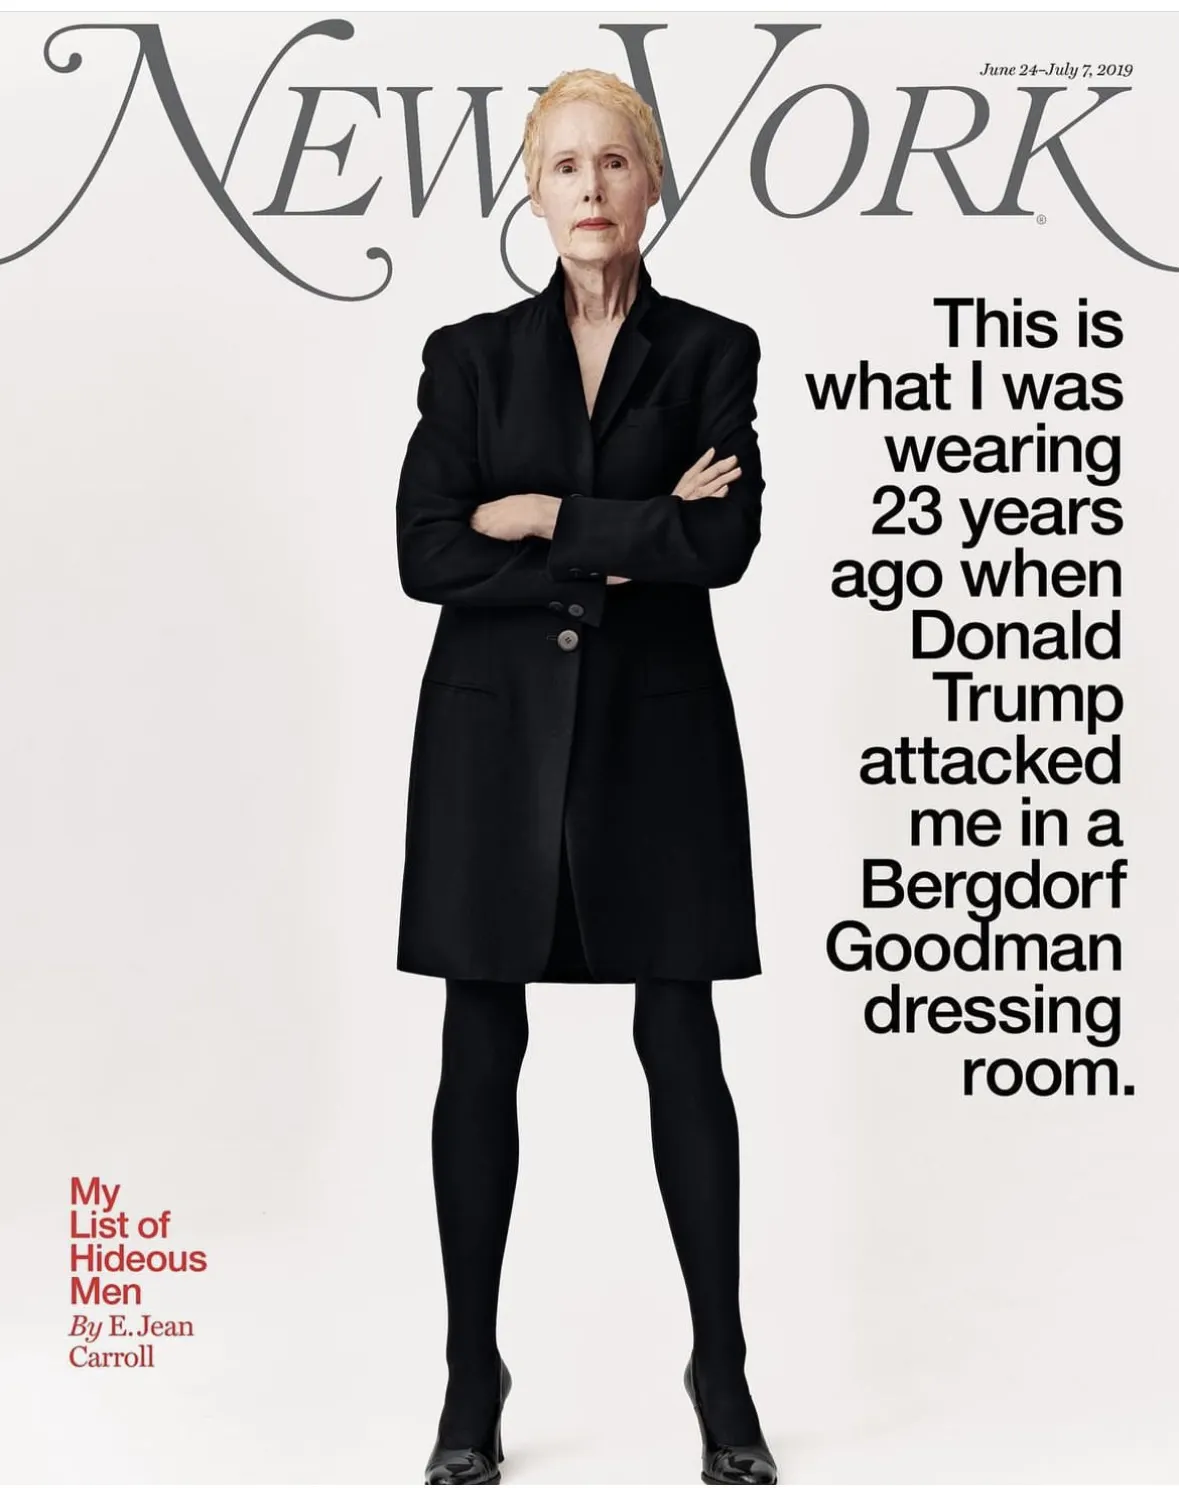 E Jean Carroll on the cover of New York magazine in 2019